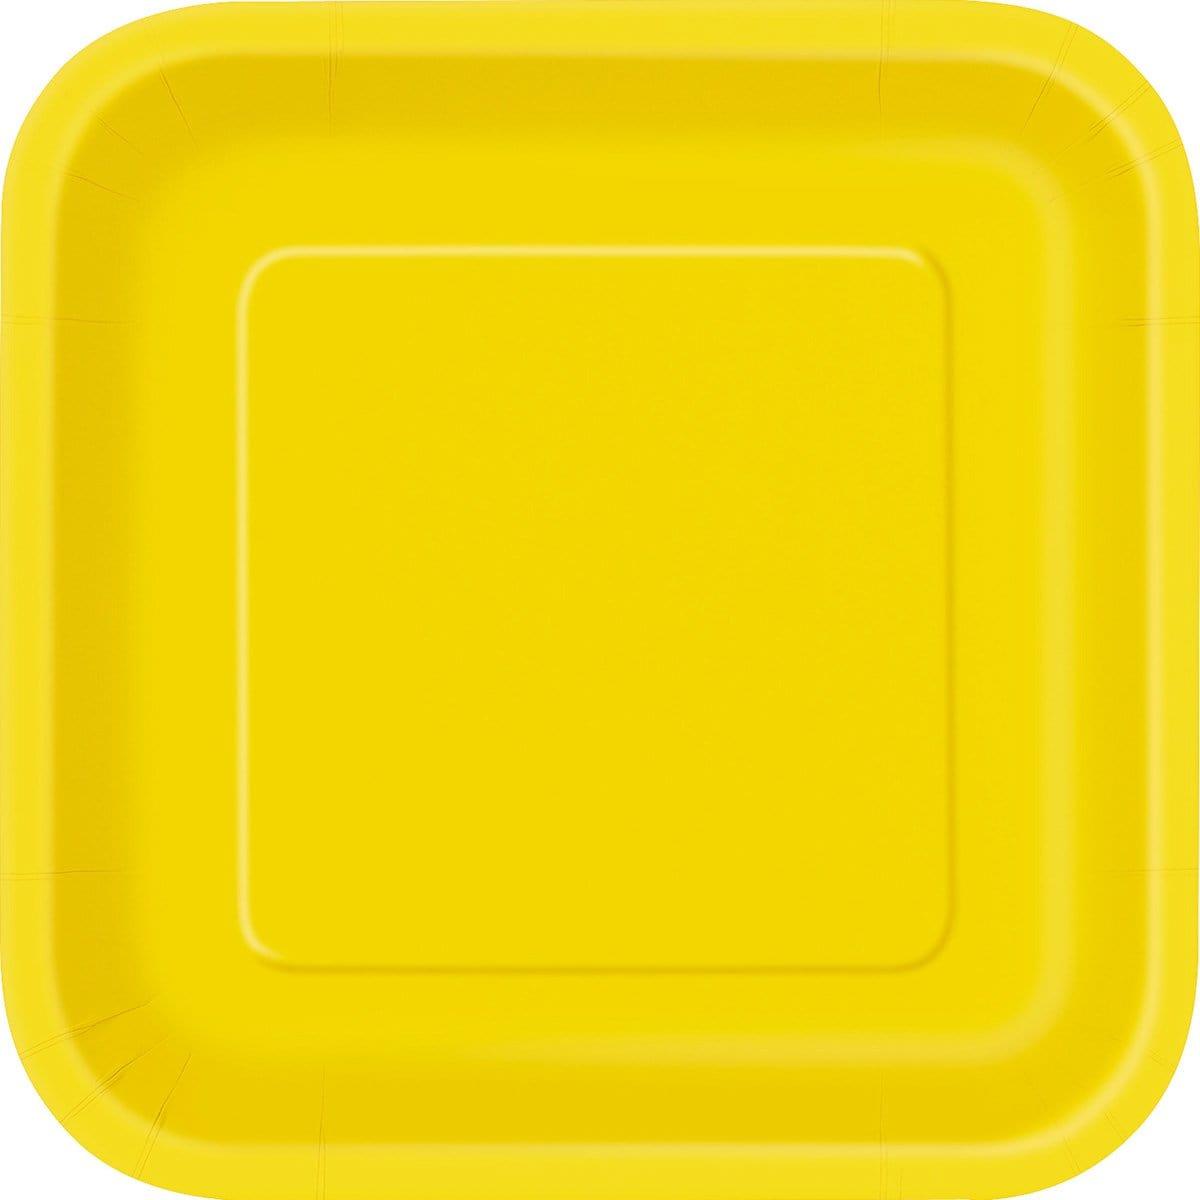 Buy Plasticware Square Paper Plates 7 In. - Sunflower Yellow 16/pkg. sold at Party Expert